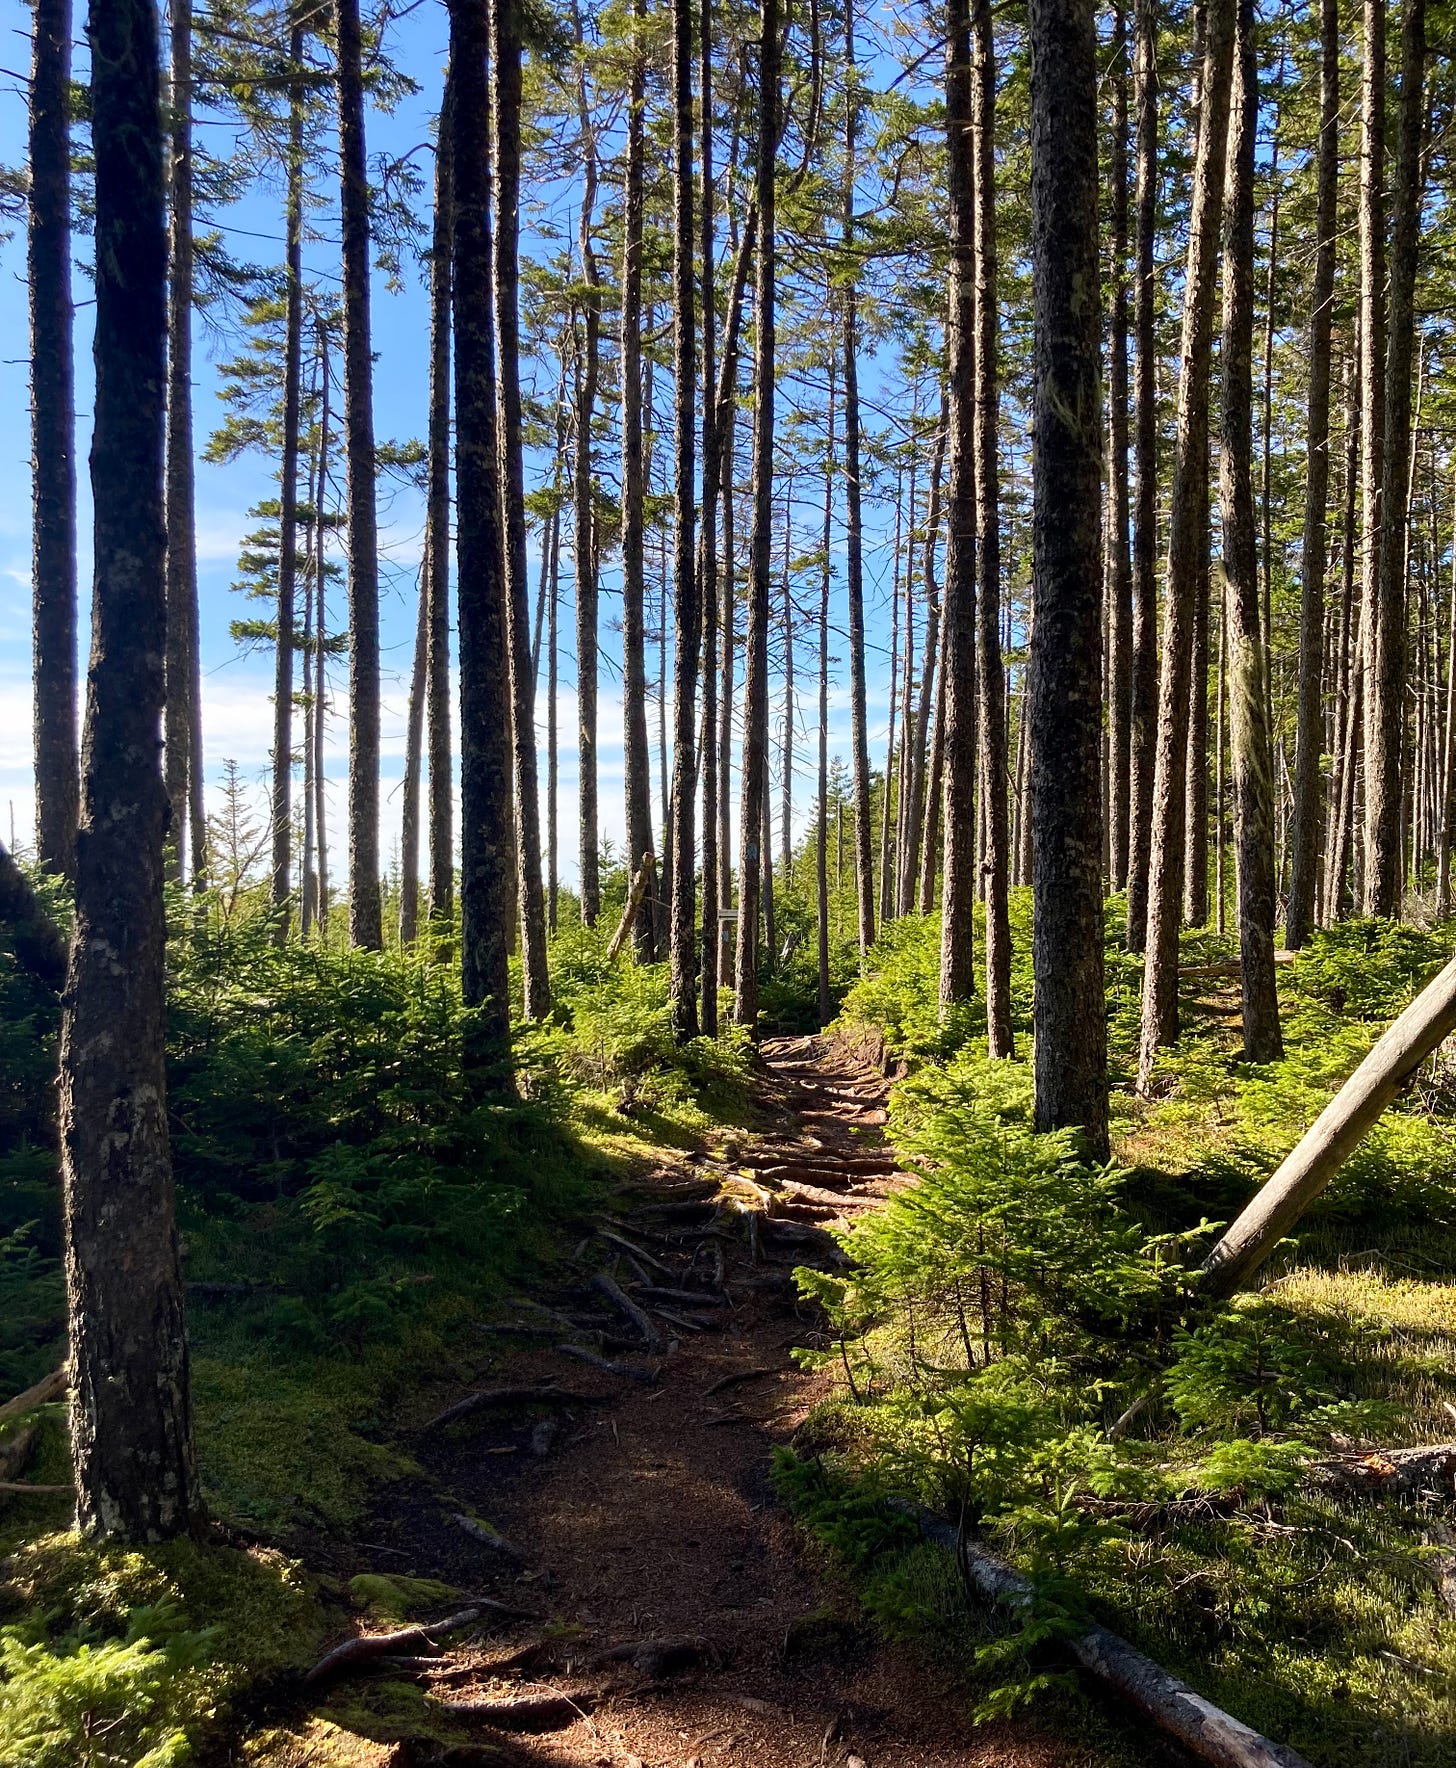 A dirt trail weaves through a moss-covered forest. The blue sky is visible in between the pines.